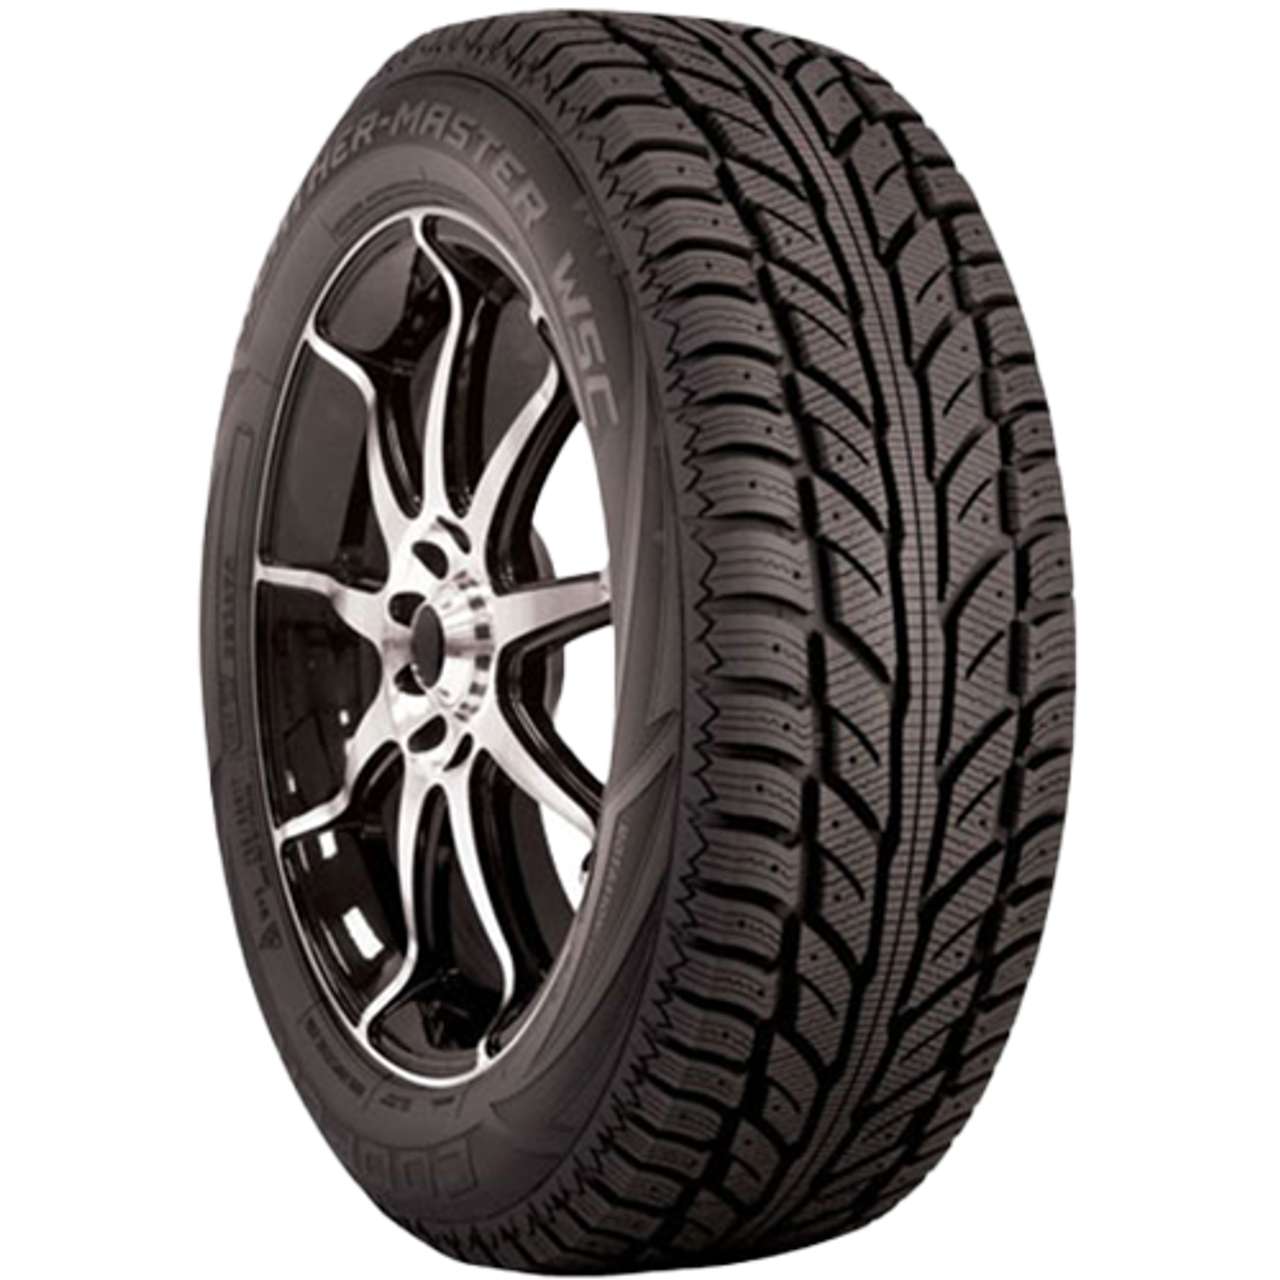 COOPER WEATHERMASTER WSC 215/70R16 100T STUDDABLE BSW